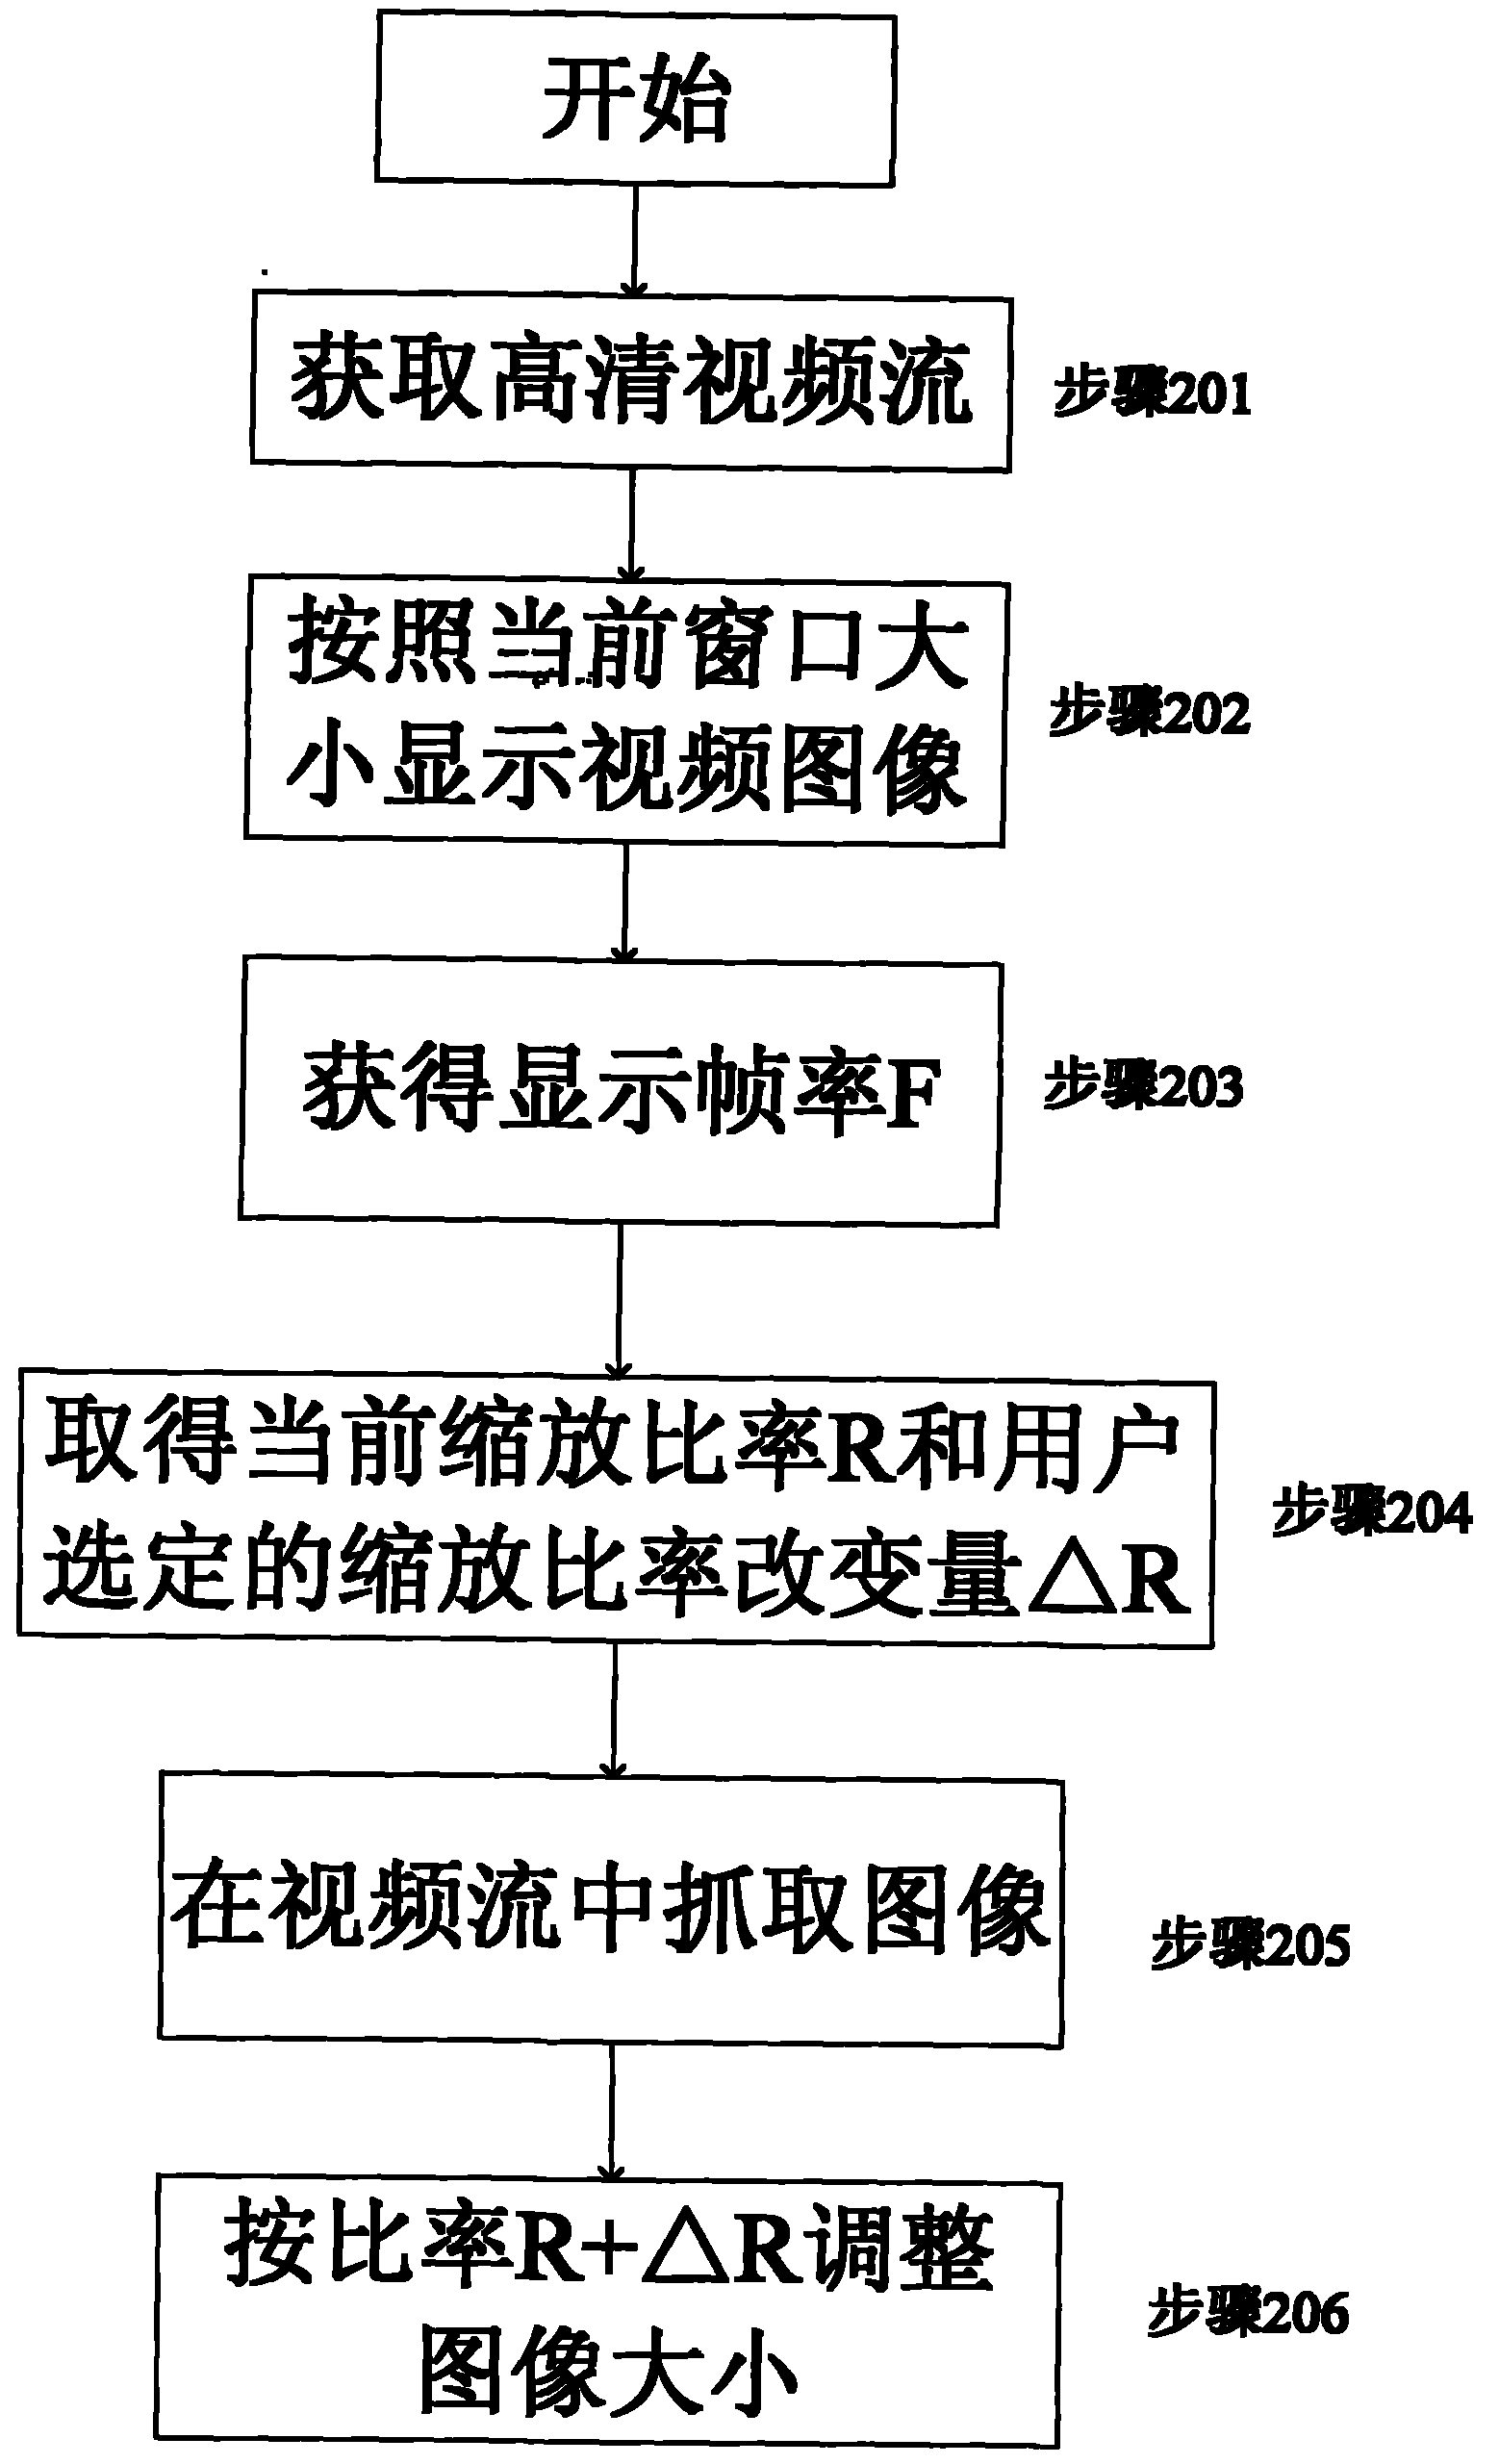 Information interaction method for teaching